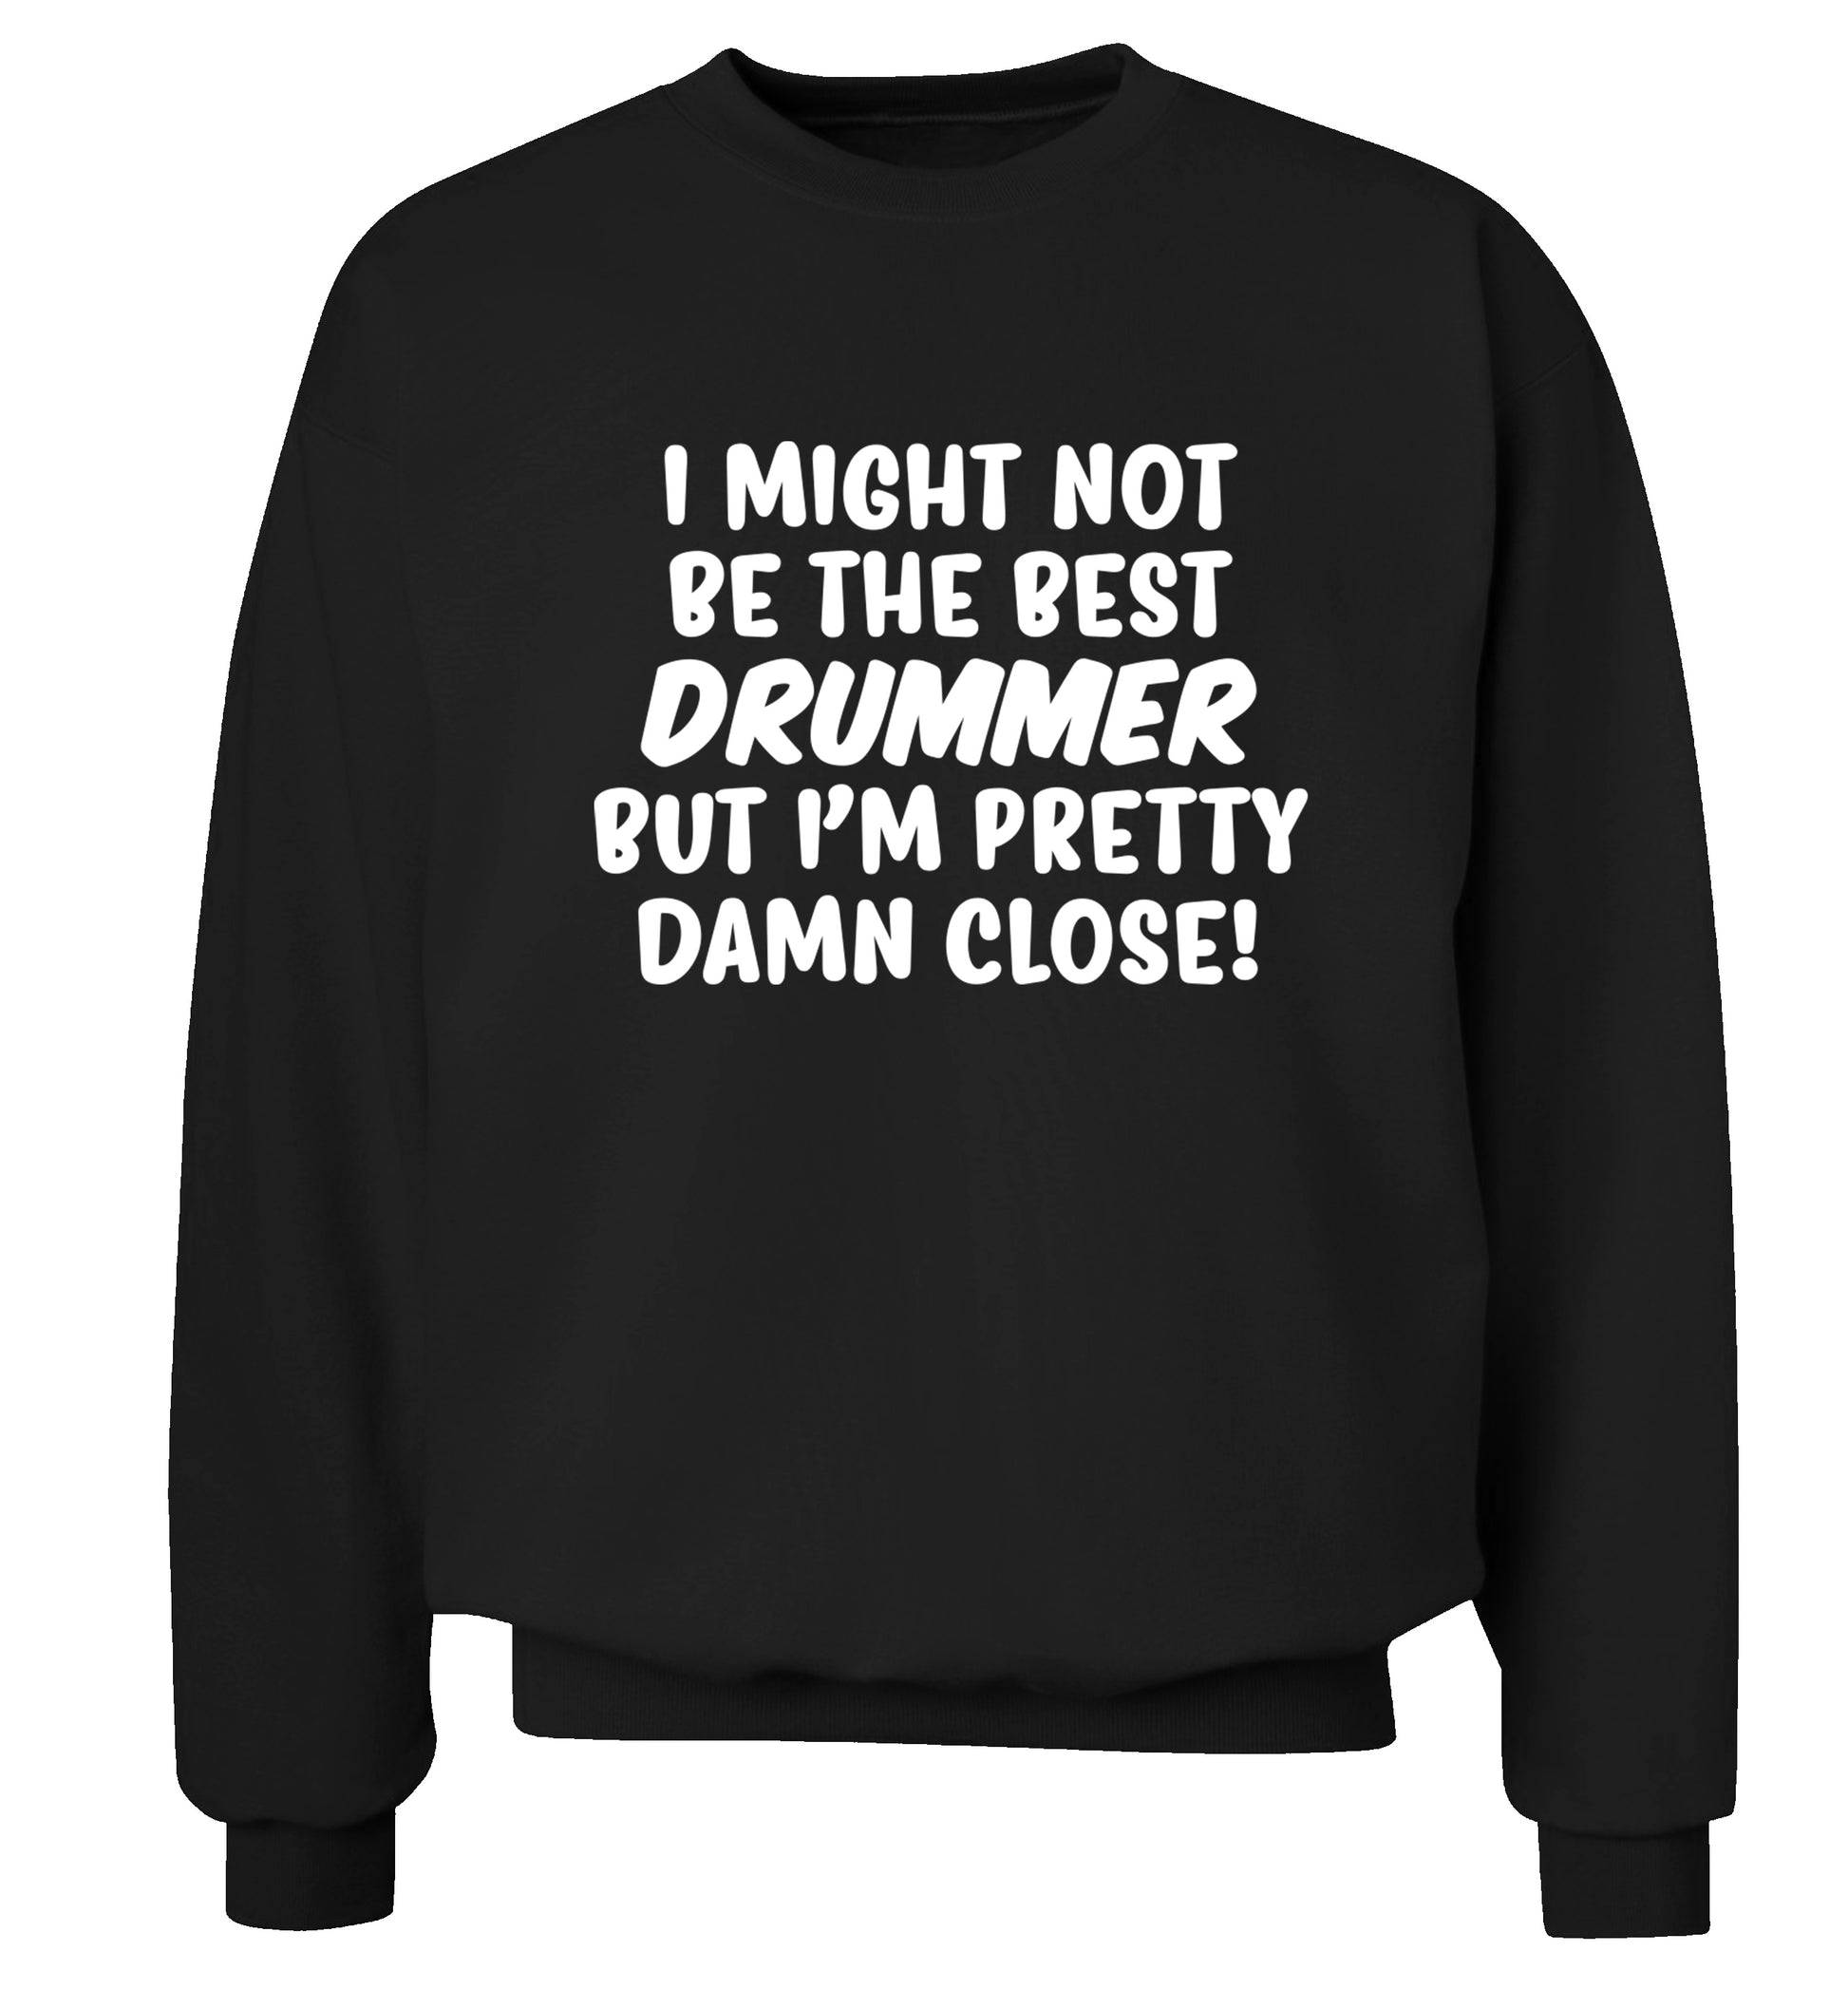 I might not be the best drummer but I'm pretty close! Adult's unisexblack Sweater 2XL